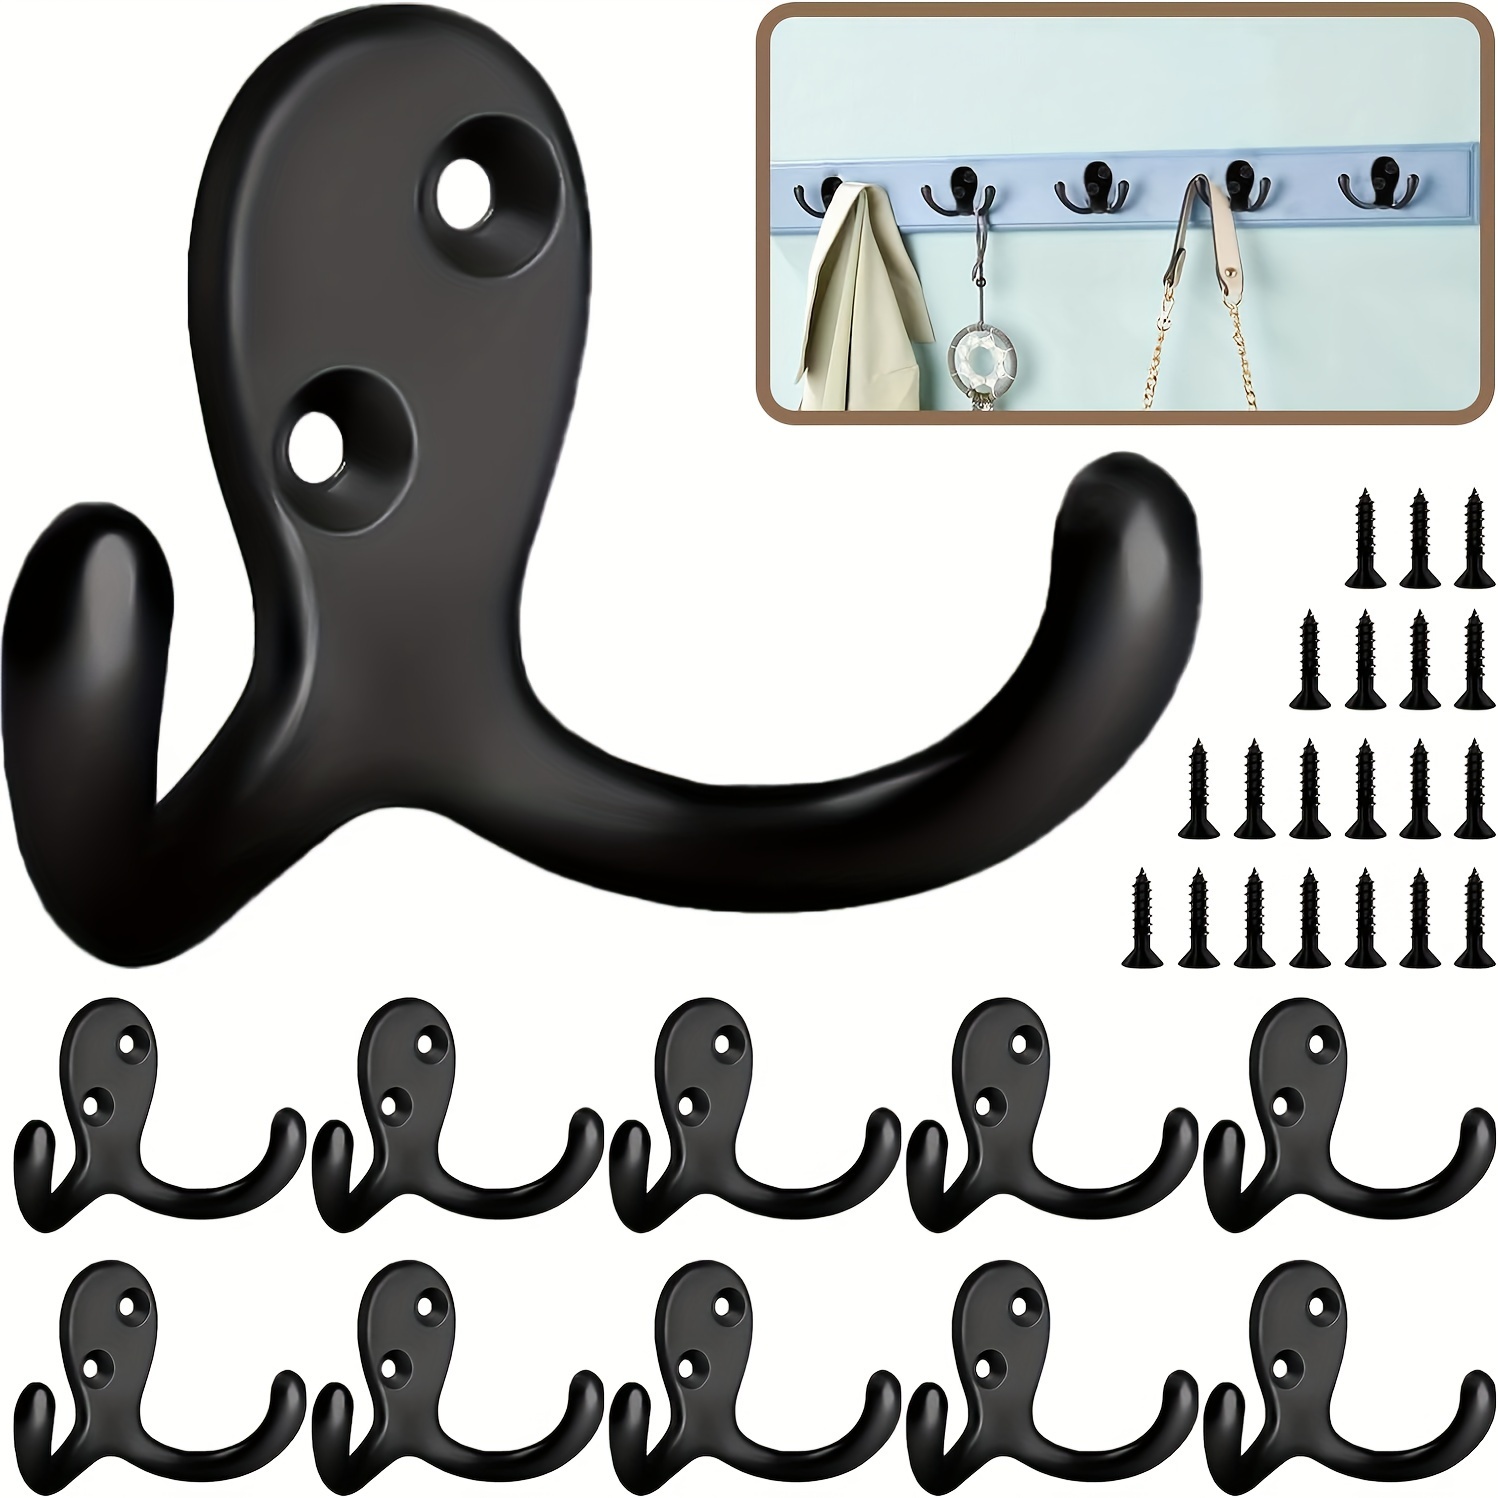 

10pcs, Coat Hook Wall-mounted, Heavy-duty Metal Double Hook With 20 Screws, Wall Single Hook Hanging Robes, Towels, Keys, Jackets, Clothes, Hats, Etc